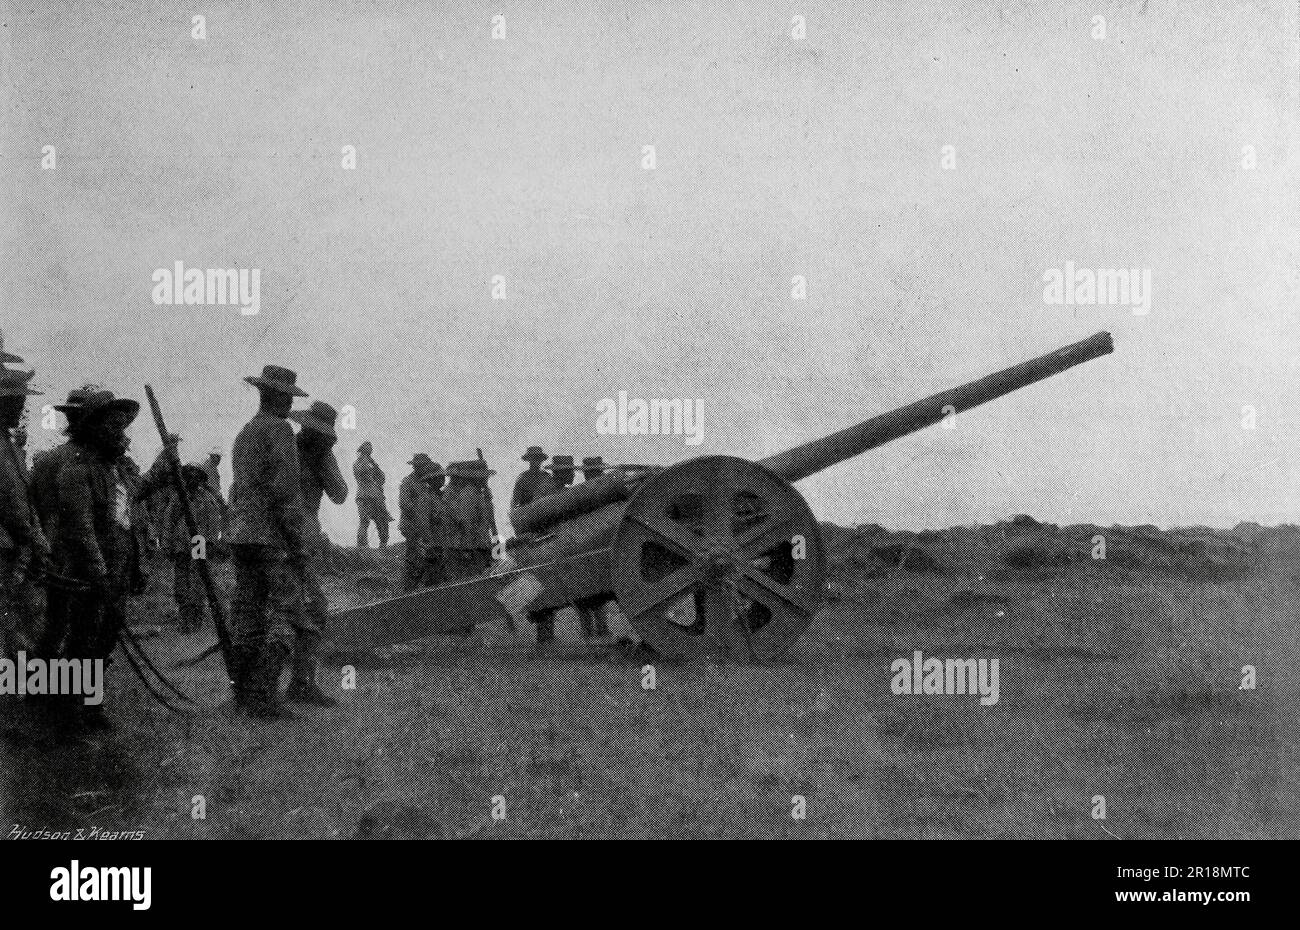 The Boer War, also known as the Second Boer War, The South African War and The Anglo-Boer War. This image shows: In Action at Colenso: A 4.7-inch naval gun firing at 9,000 yards. Original photo by “Navy and Army”, c1899. Stock Photo